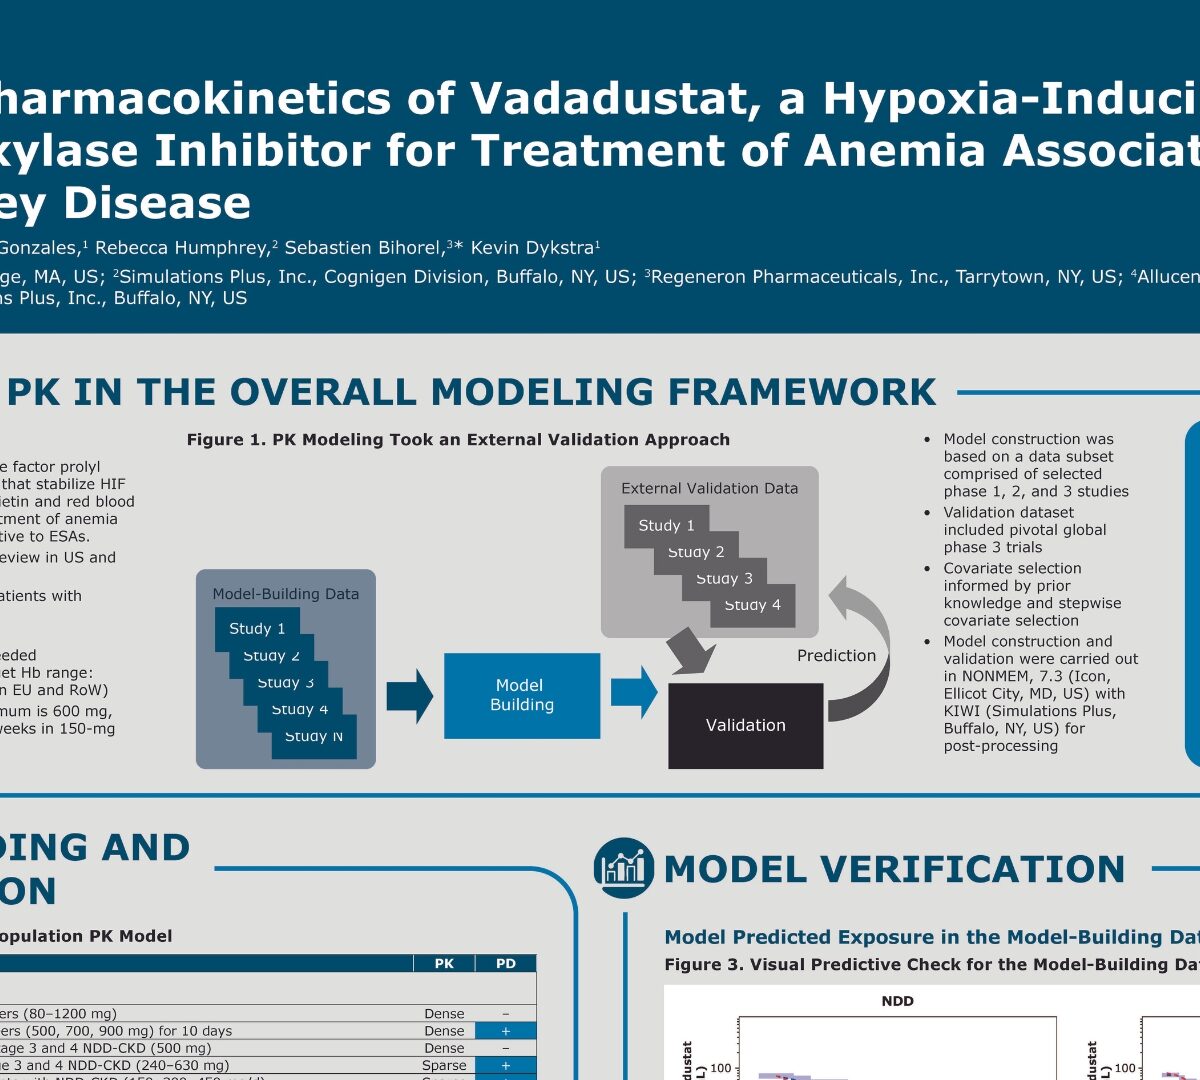 Population pharmacokinetics of vadadustat, a hypoxia-inducible factor prolyl hydroxylase inhibitor for treatment of anemia associated with chronic kidney disease